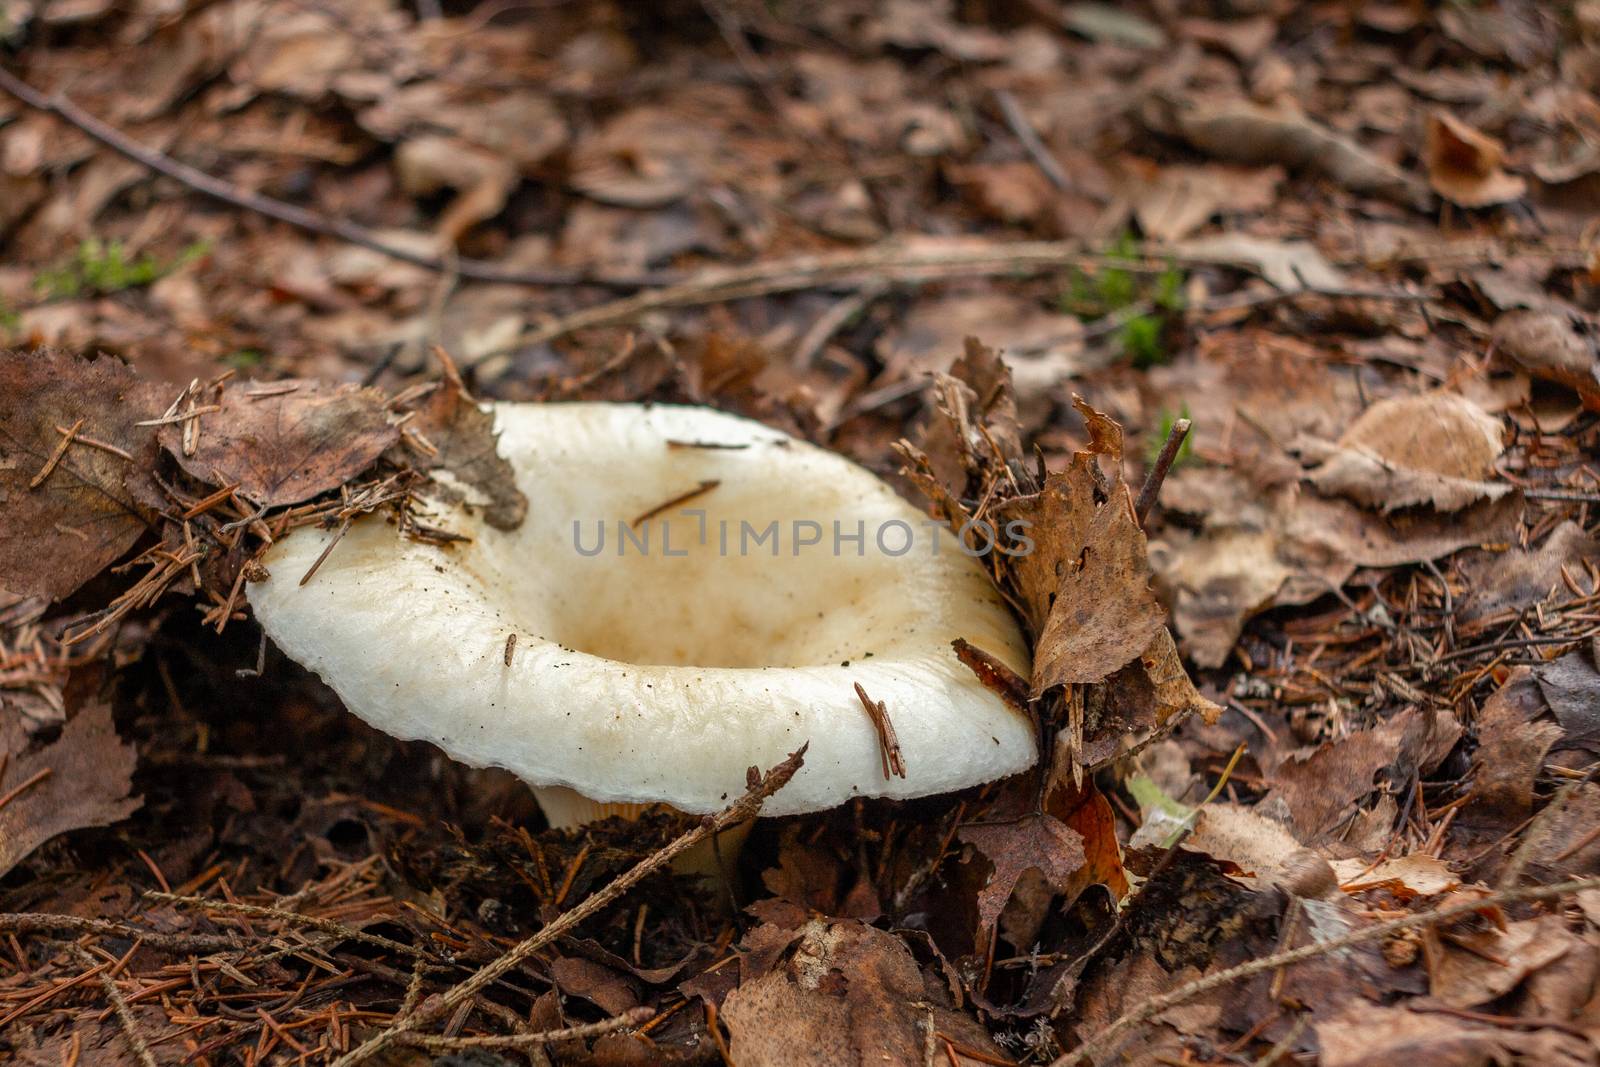 Edible forest mushroom Lactarius resimus known as the milky cup grows in the forest from under leaf litter. Pickles from it is considered a delicacy in Russia and Ukraine by galsand